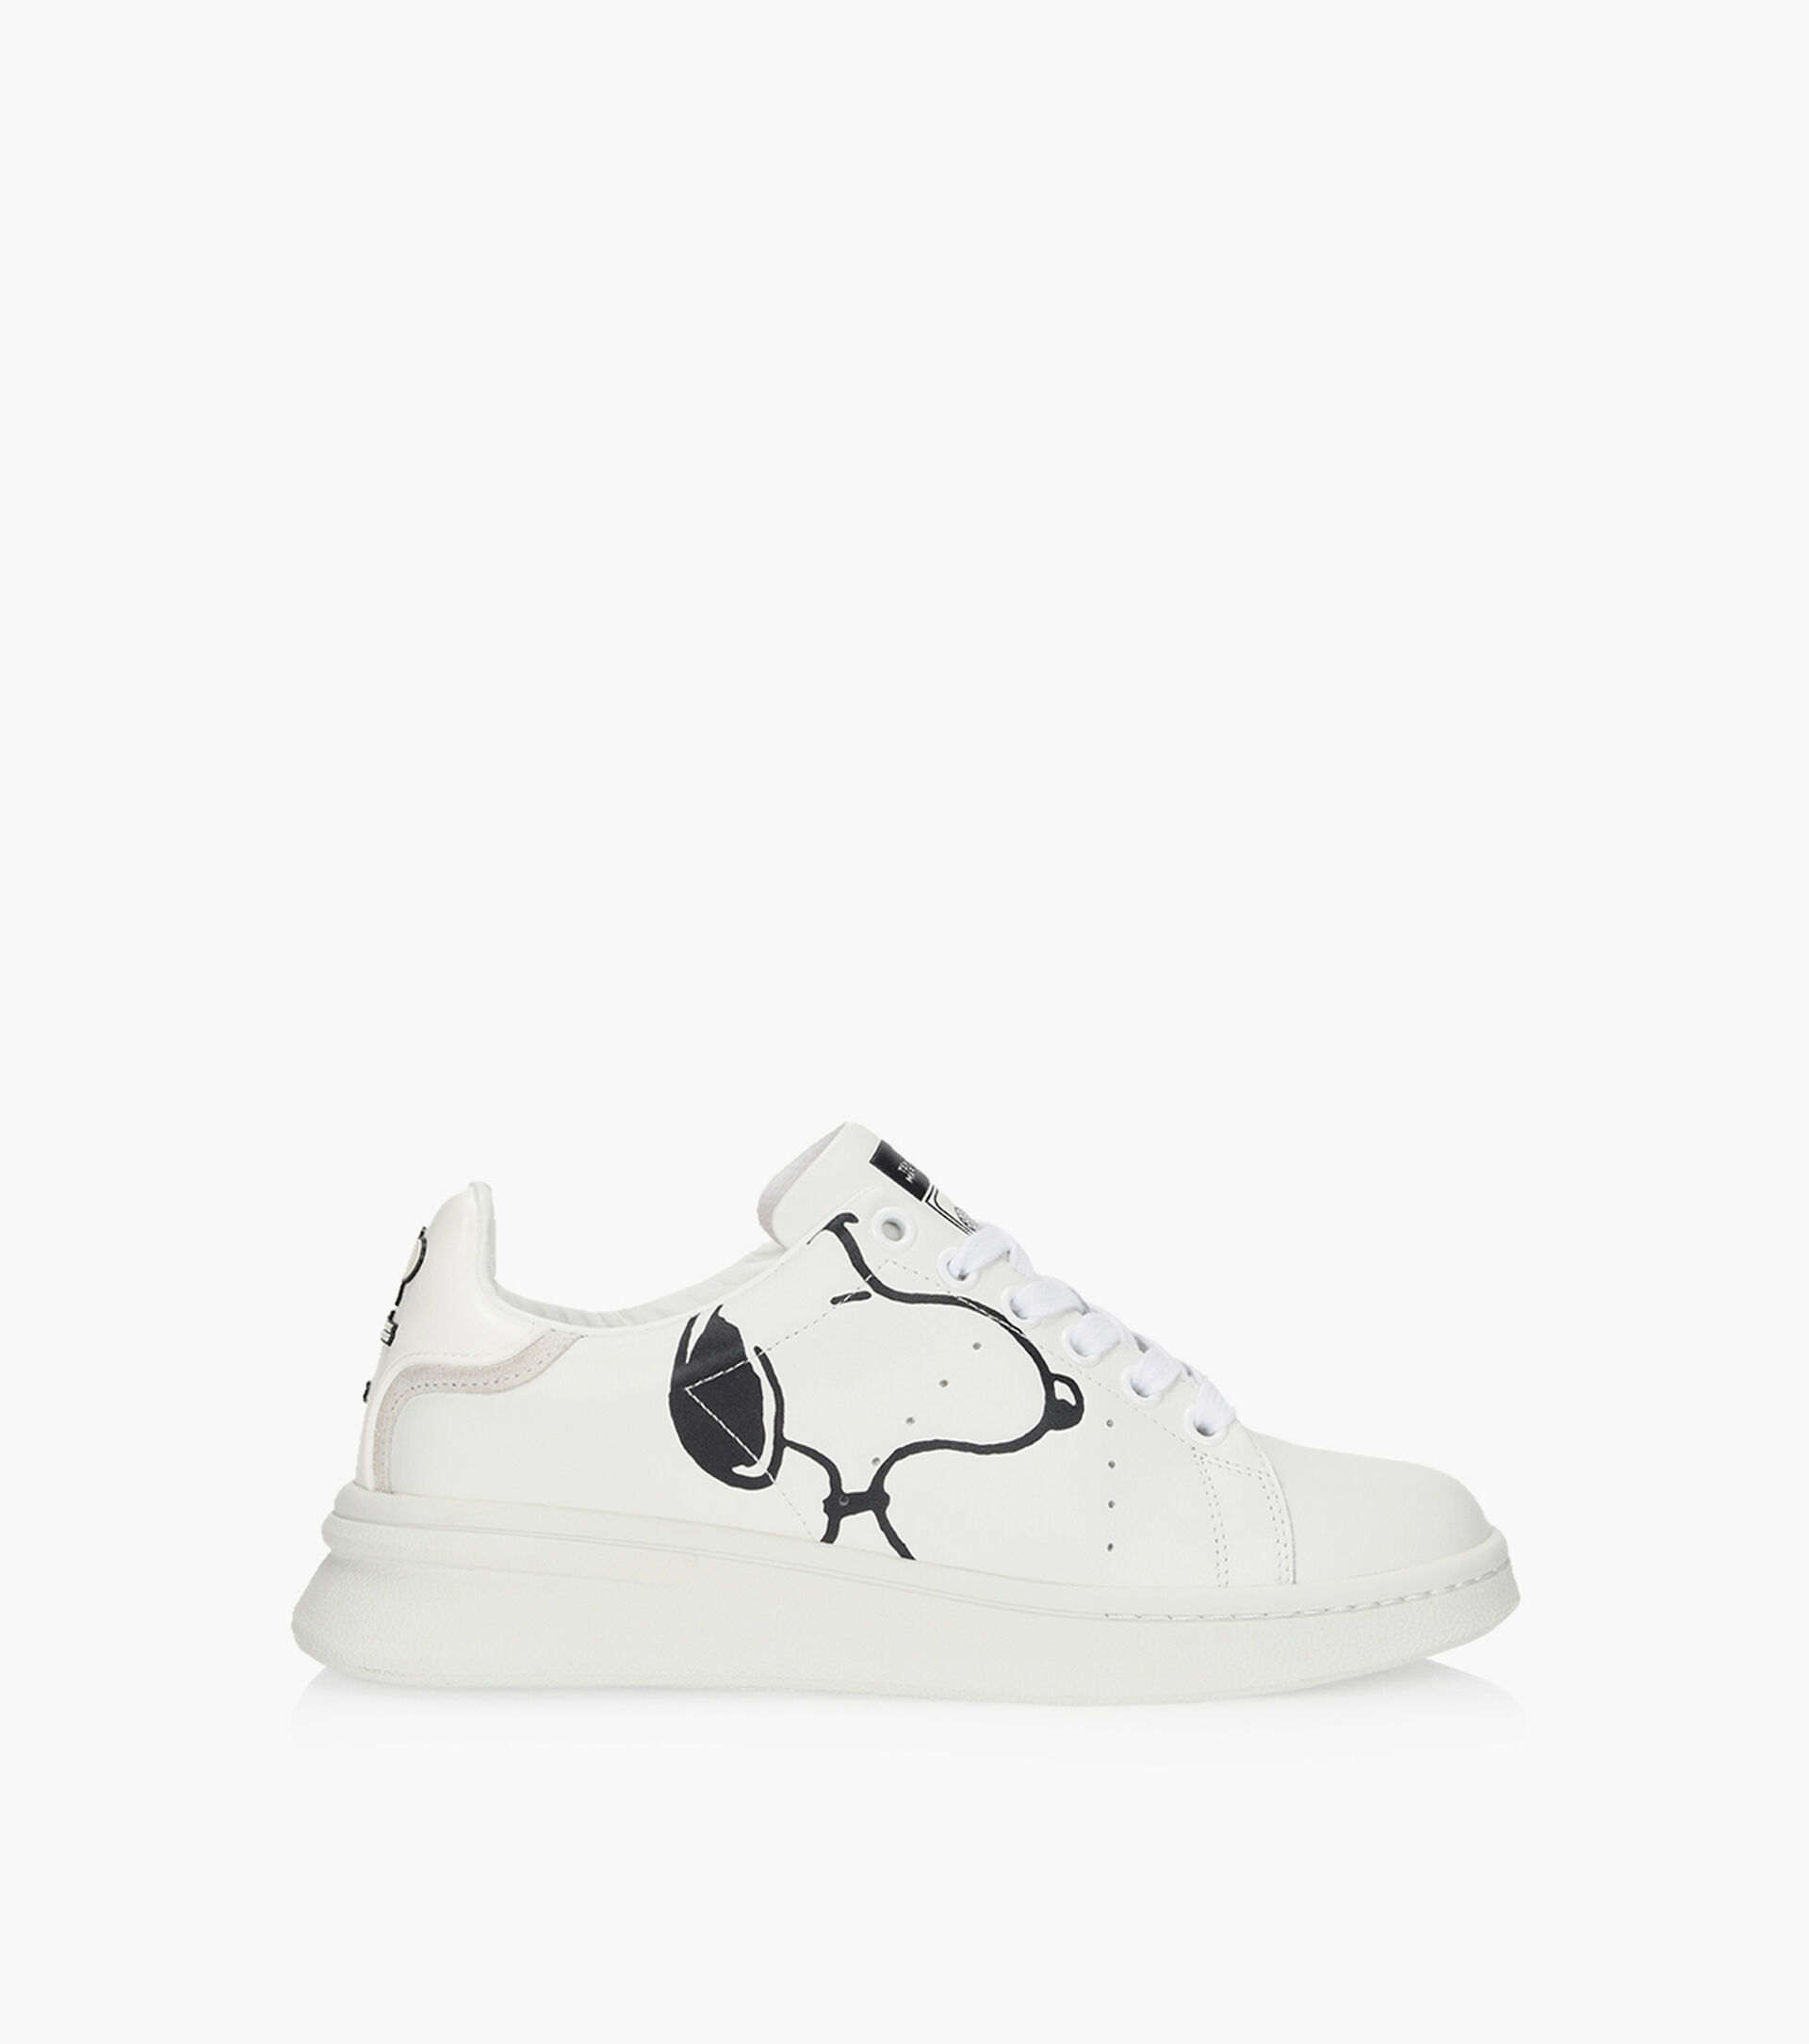 MARC JACOBS PEANUTS X THE TENNIS SHOE - White Leather | Browns Shoes